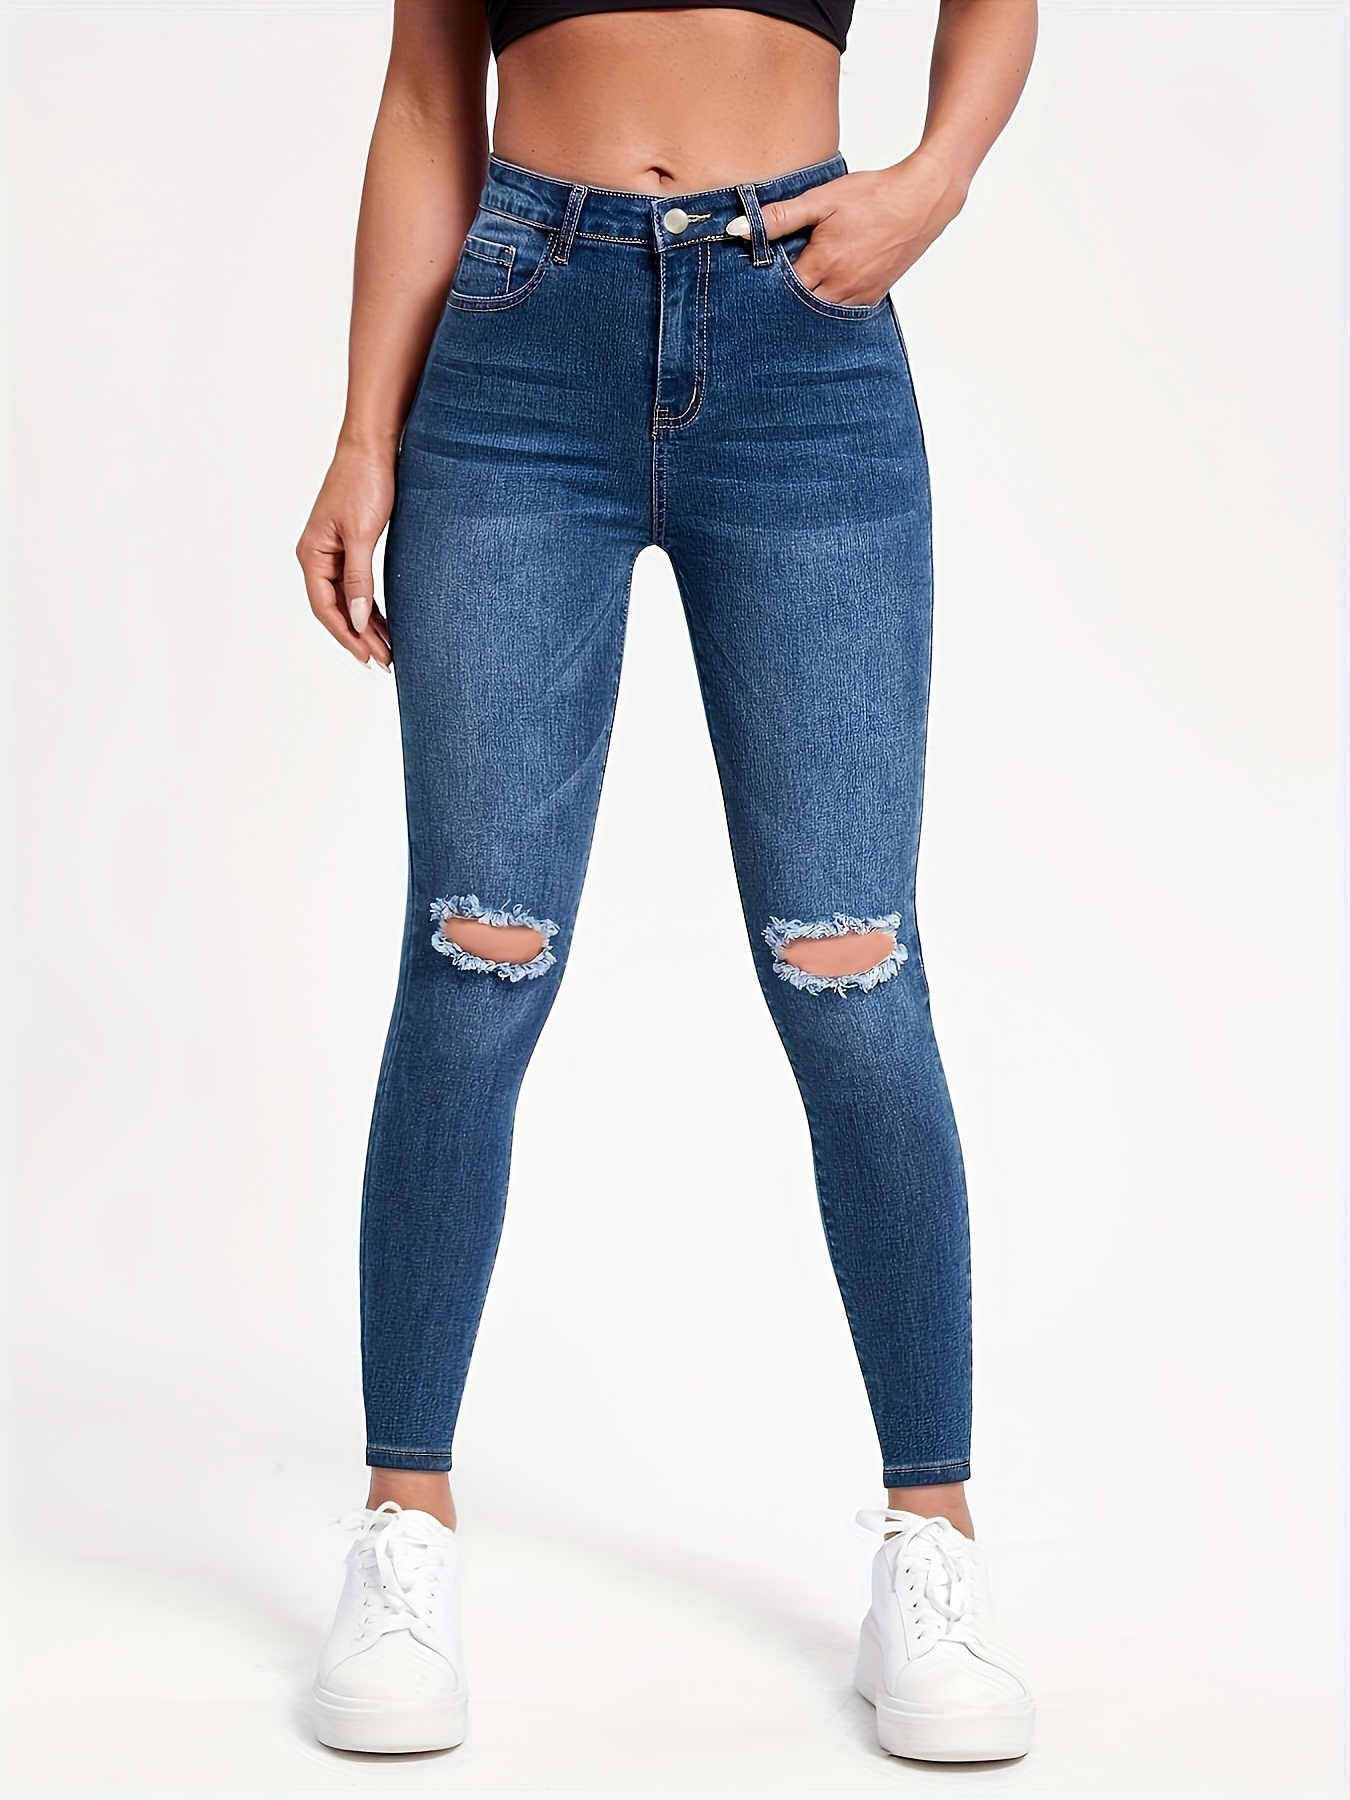 Ripped Distressed Knee Cut Jeans, High Strech Whiskering Skinny Denim  Pants, Sexy & Stylish, Women's Denim Jeans & Clothing